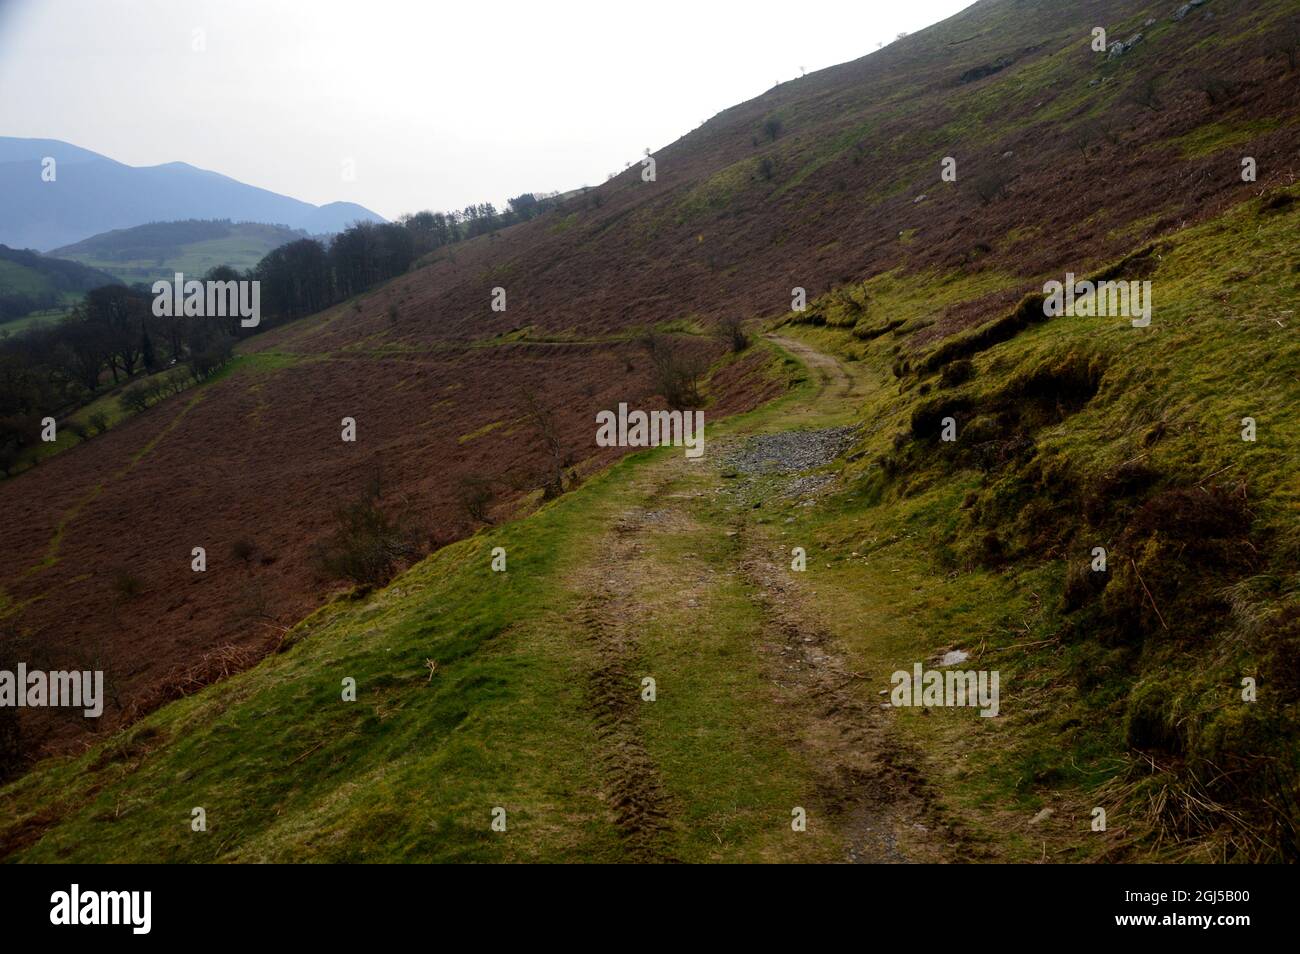 The Old Corpse Road on the Wainwright 'Ling Fell' in the Lake District National Park, Cumbria, England, UK. Stock Photo